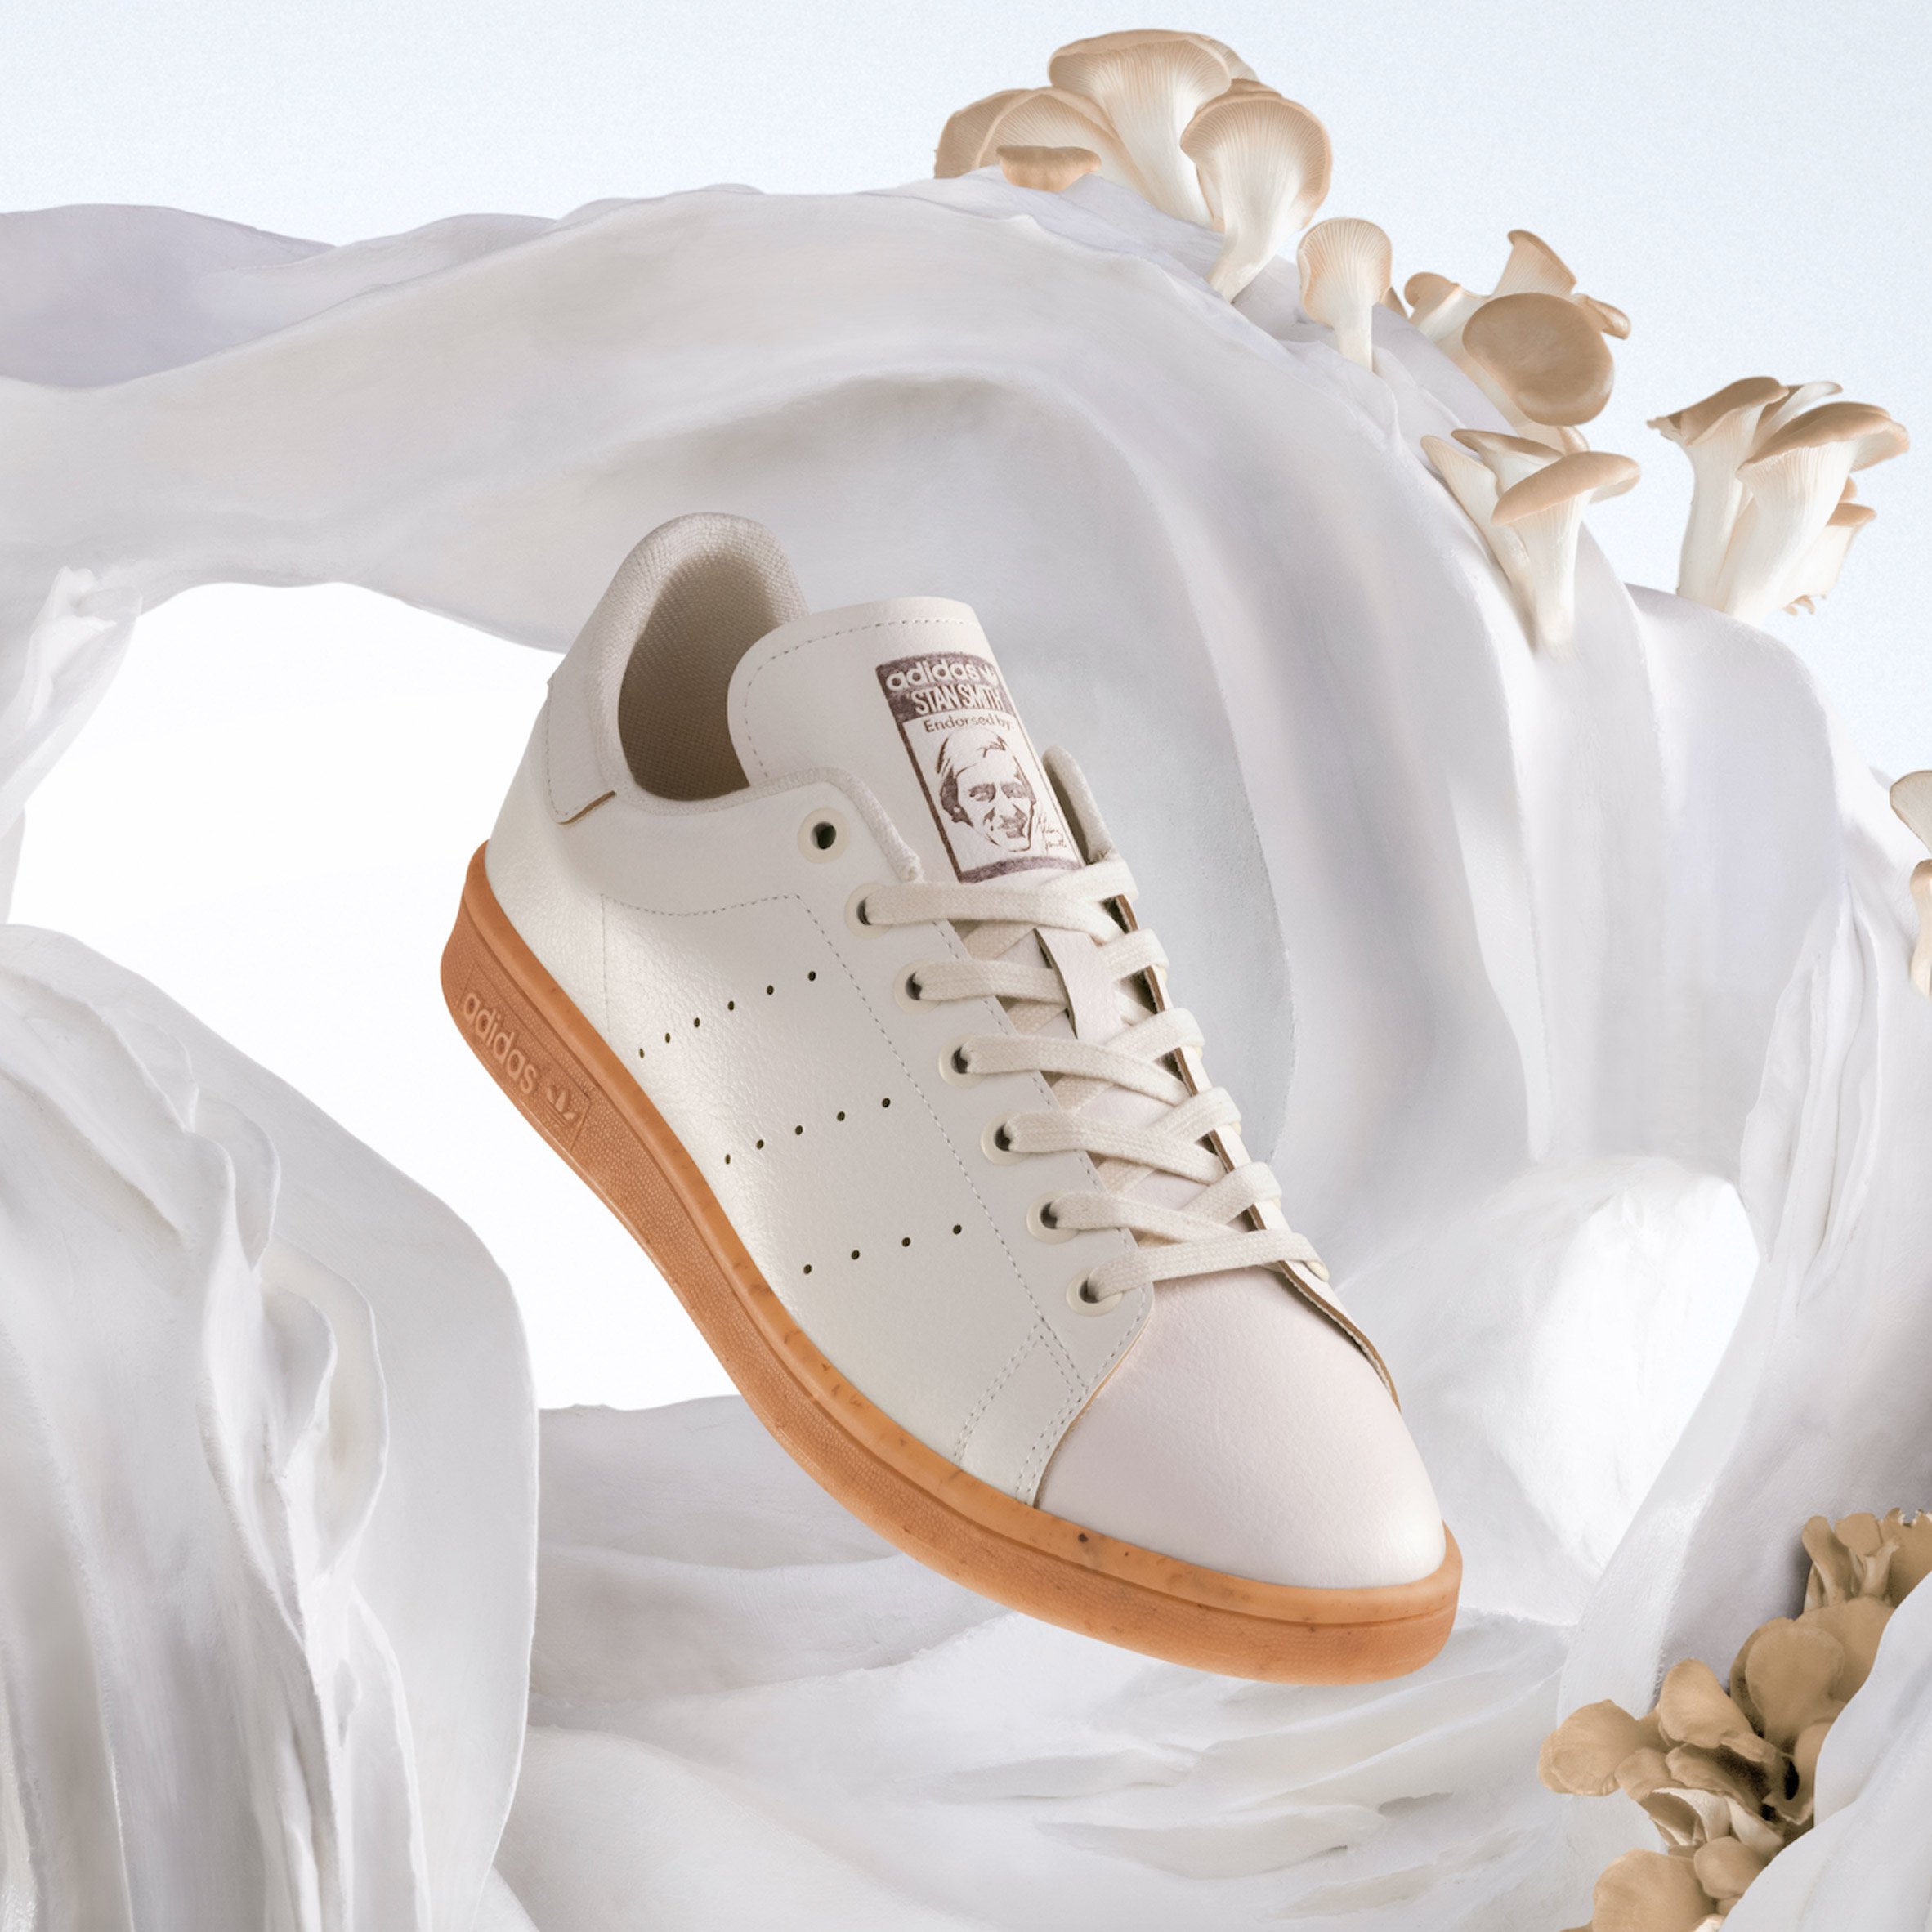 Adidas Stan Mylo trainers made from mycelium leather